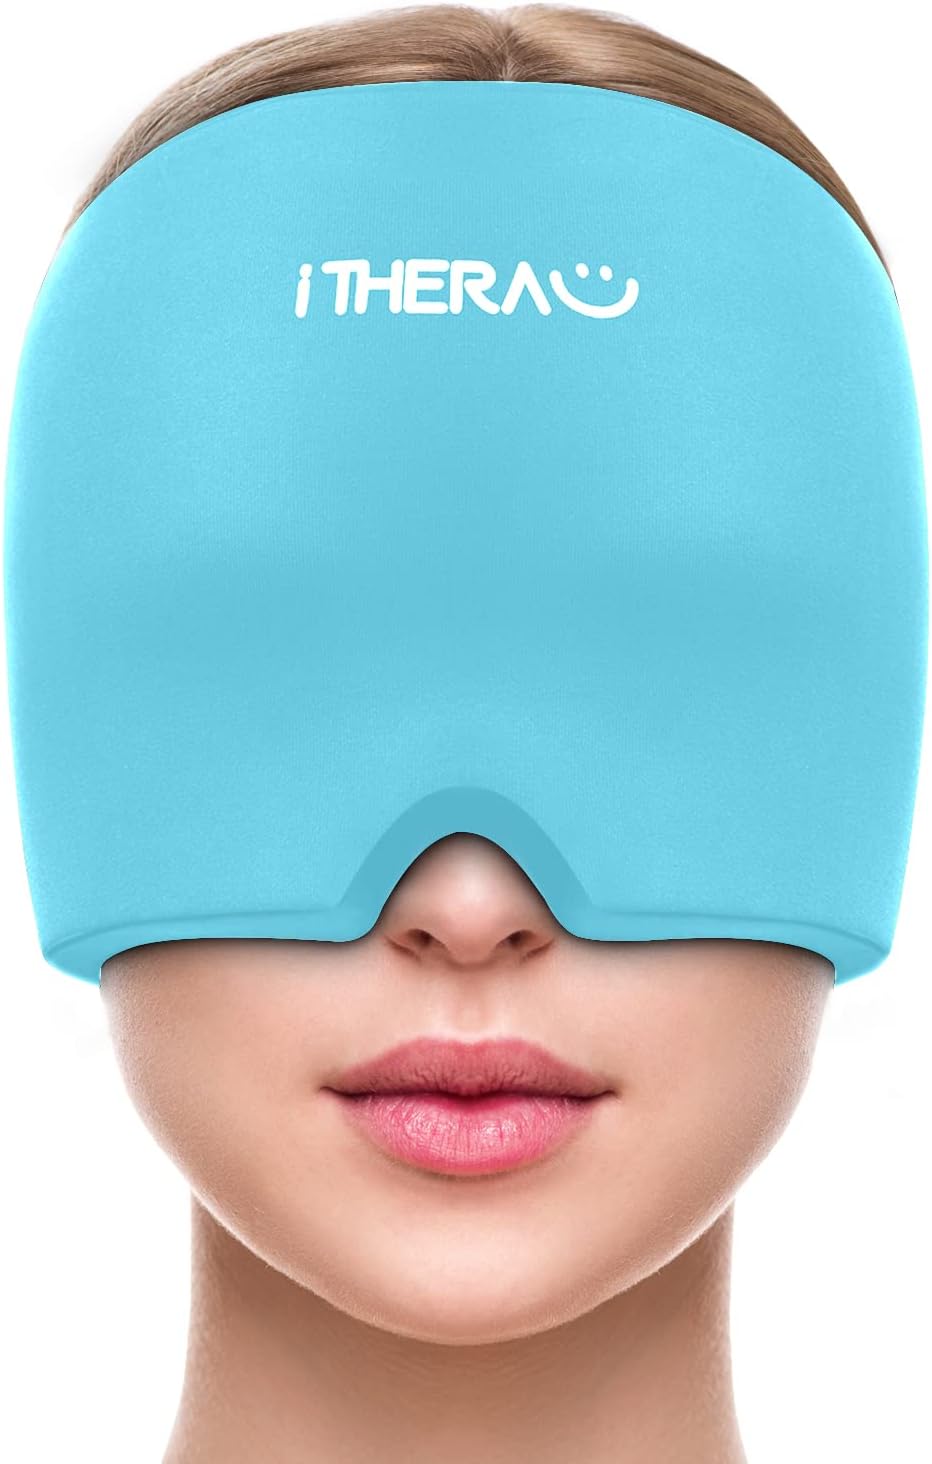 Review of iTHERAU Migraine Ice Head Wrap-Headache Relief Hat, Migraine Relief Cap, Cold Therapy Headache Relief Cap for Migraine Eyes Mask Blue